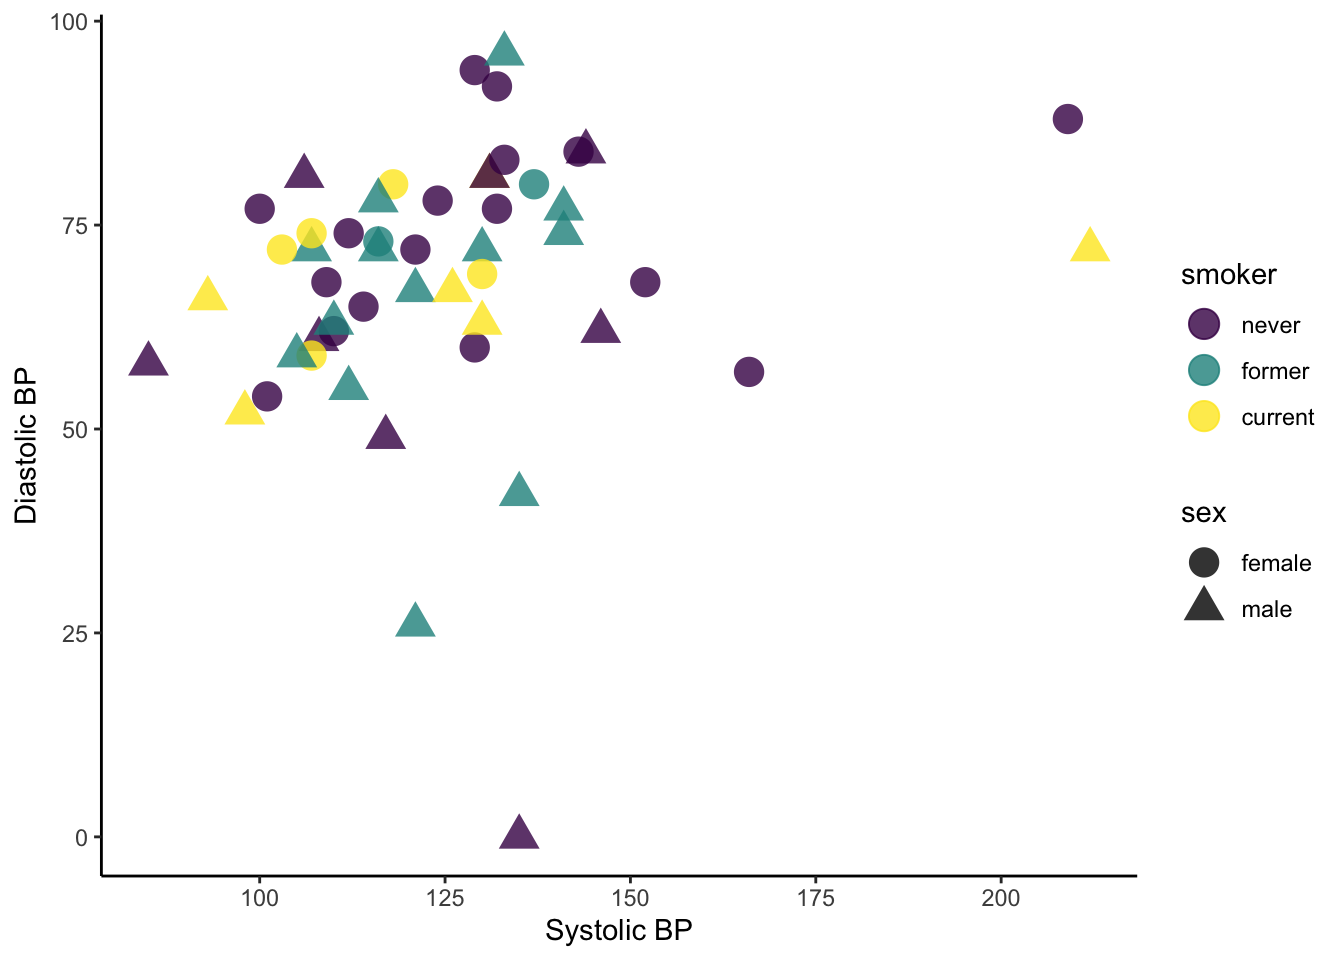 Scatterplot plot now has updated readable labels for Systolic BP and Diastolic BP.